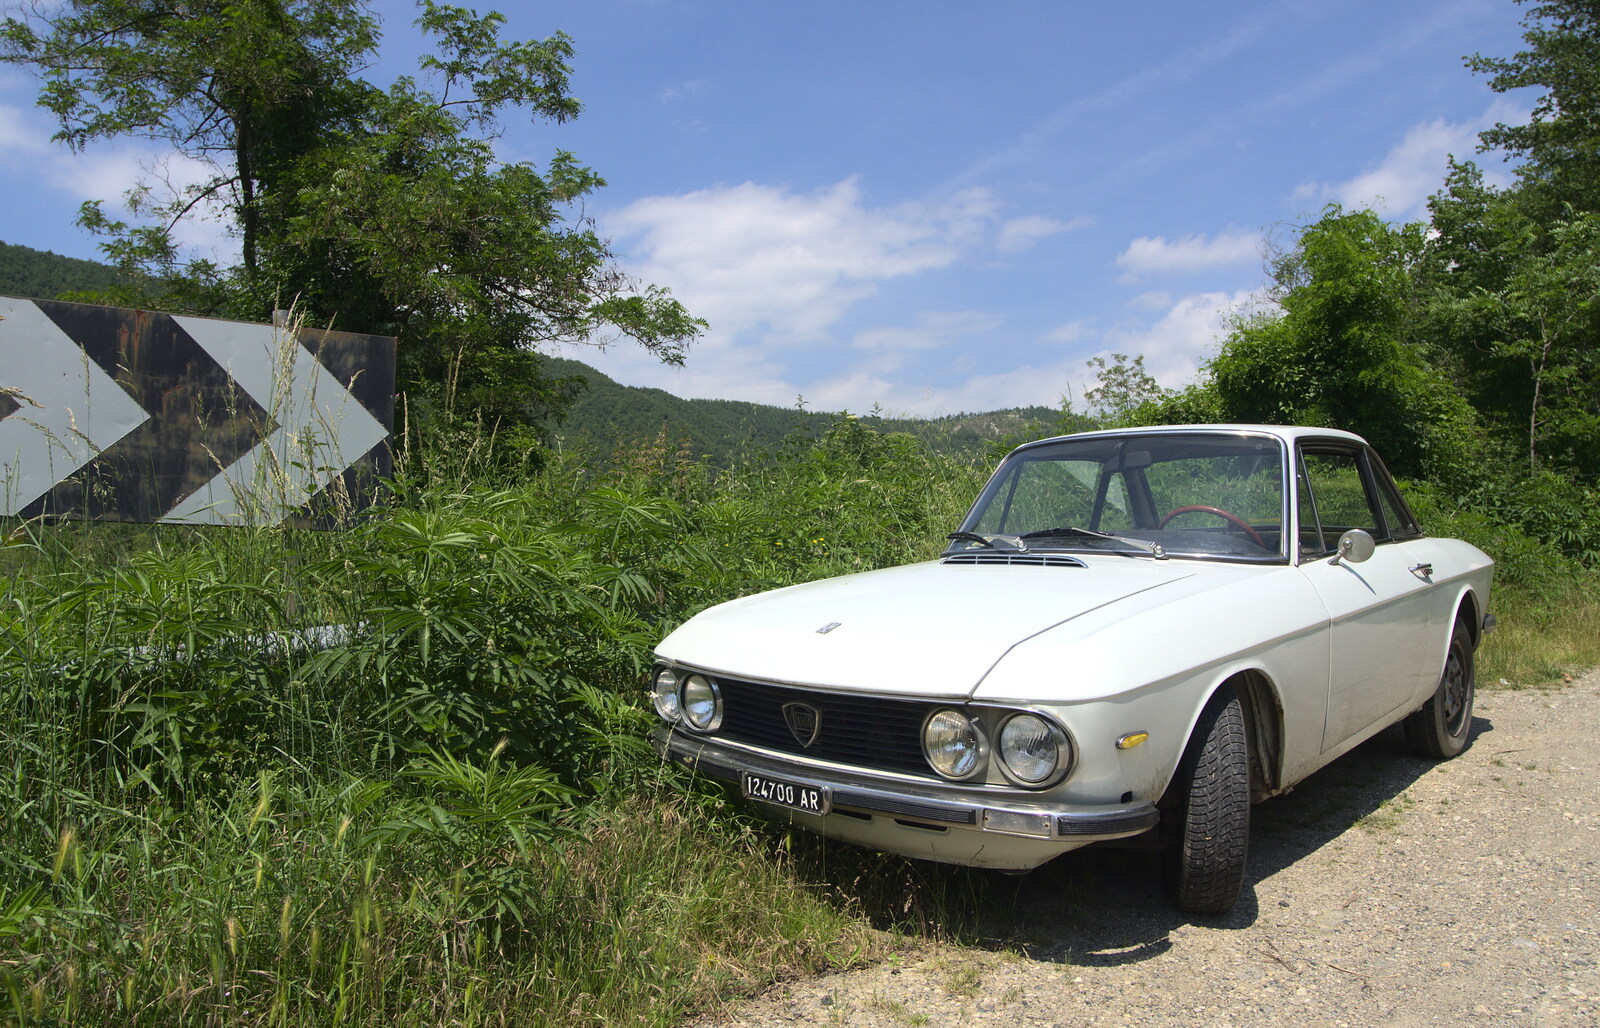 There's a cool old Lancia in a lay-by from La Verna Monastery and the Fireflies of Tuscany, Italy - 14th June 2013